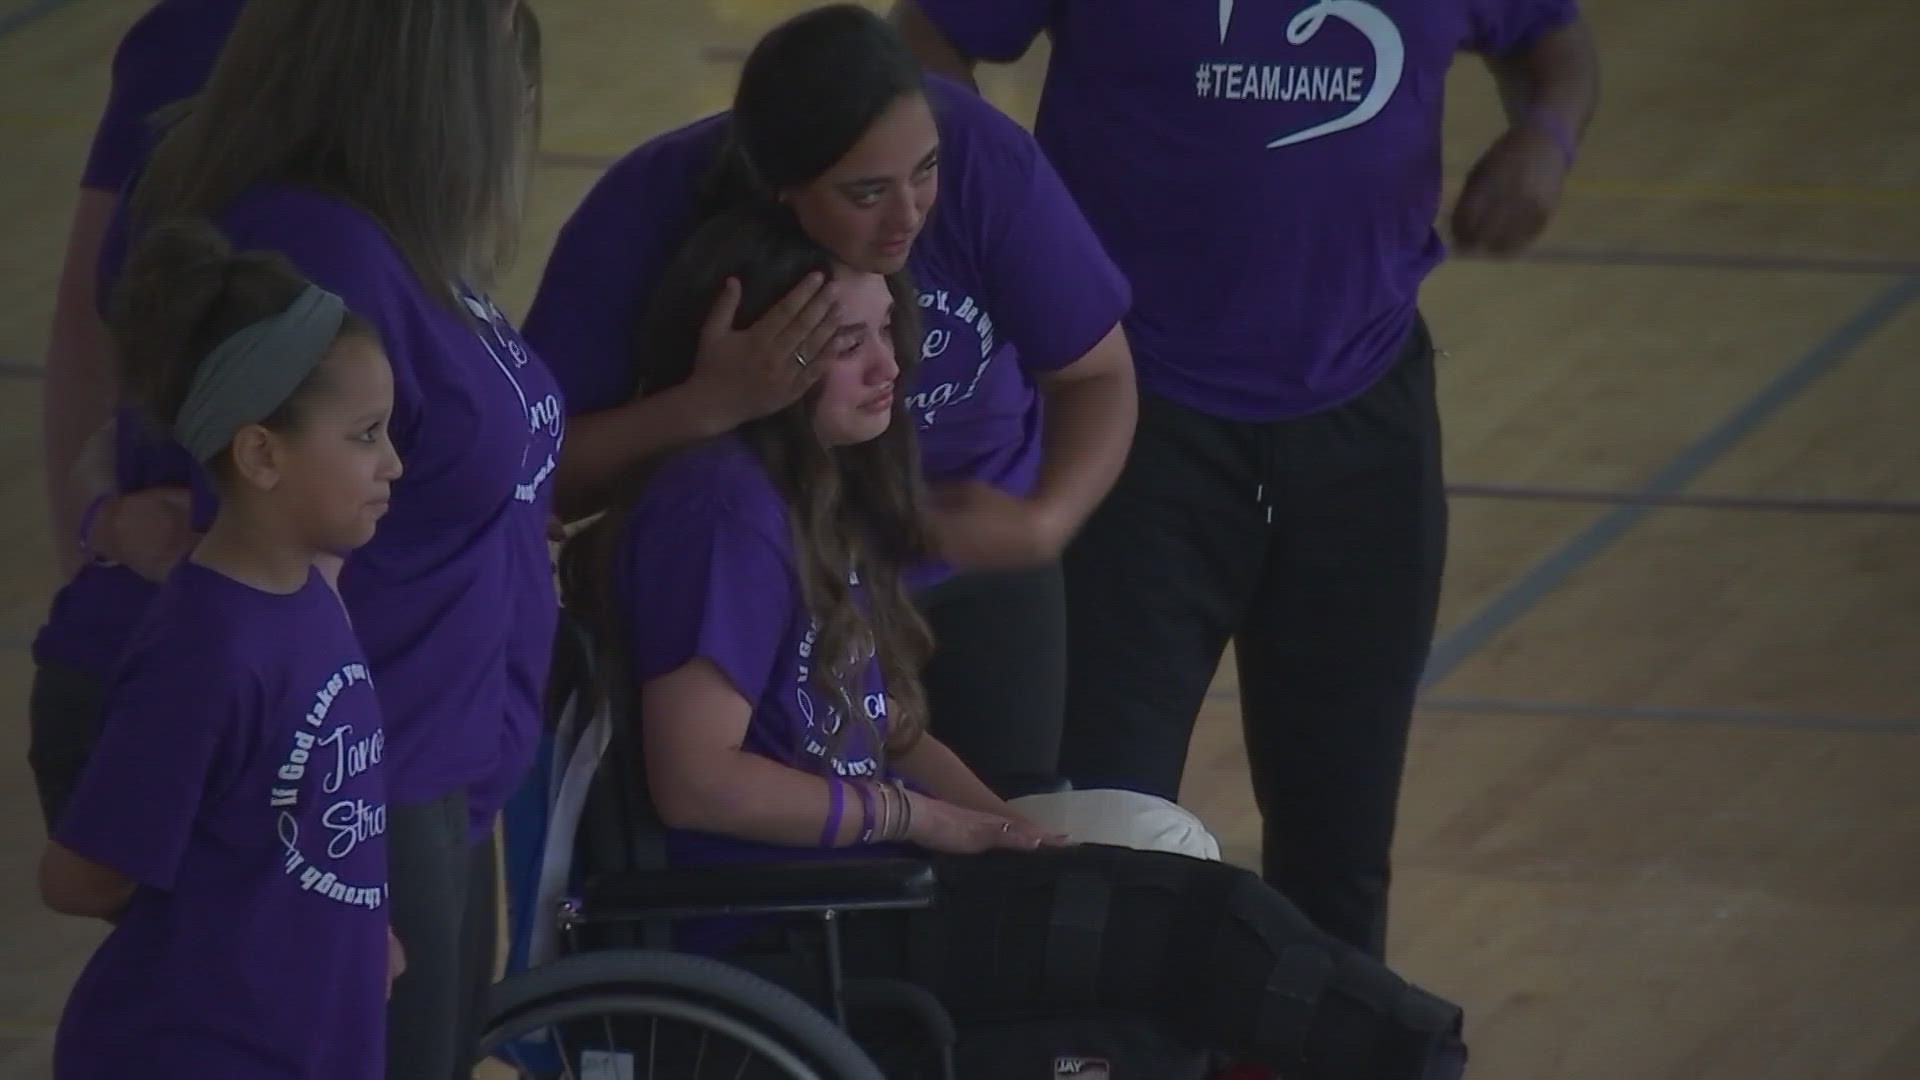 Janae Edmondson, who was in St. Louis for a volleyball tournament, was critically injured and lost both of her legs.